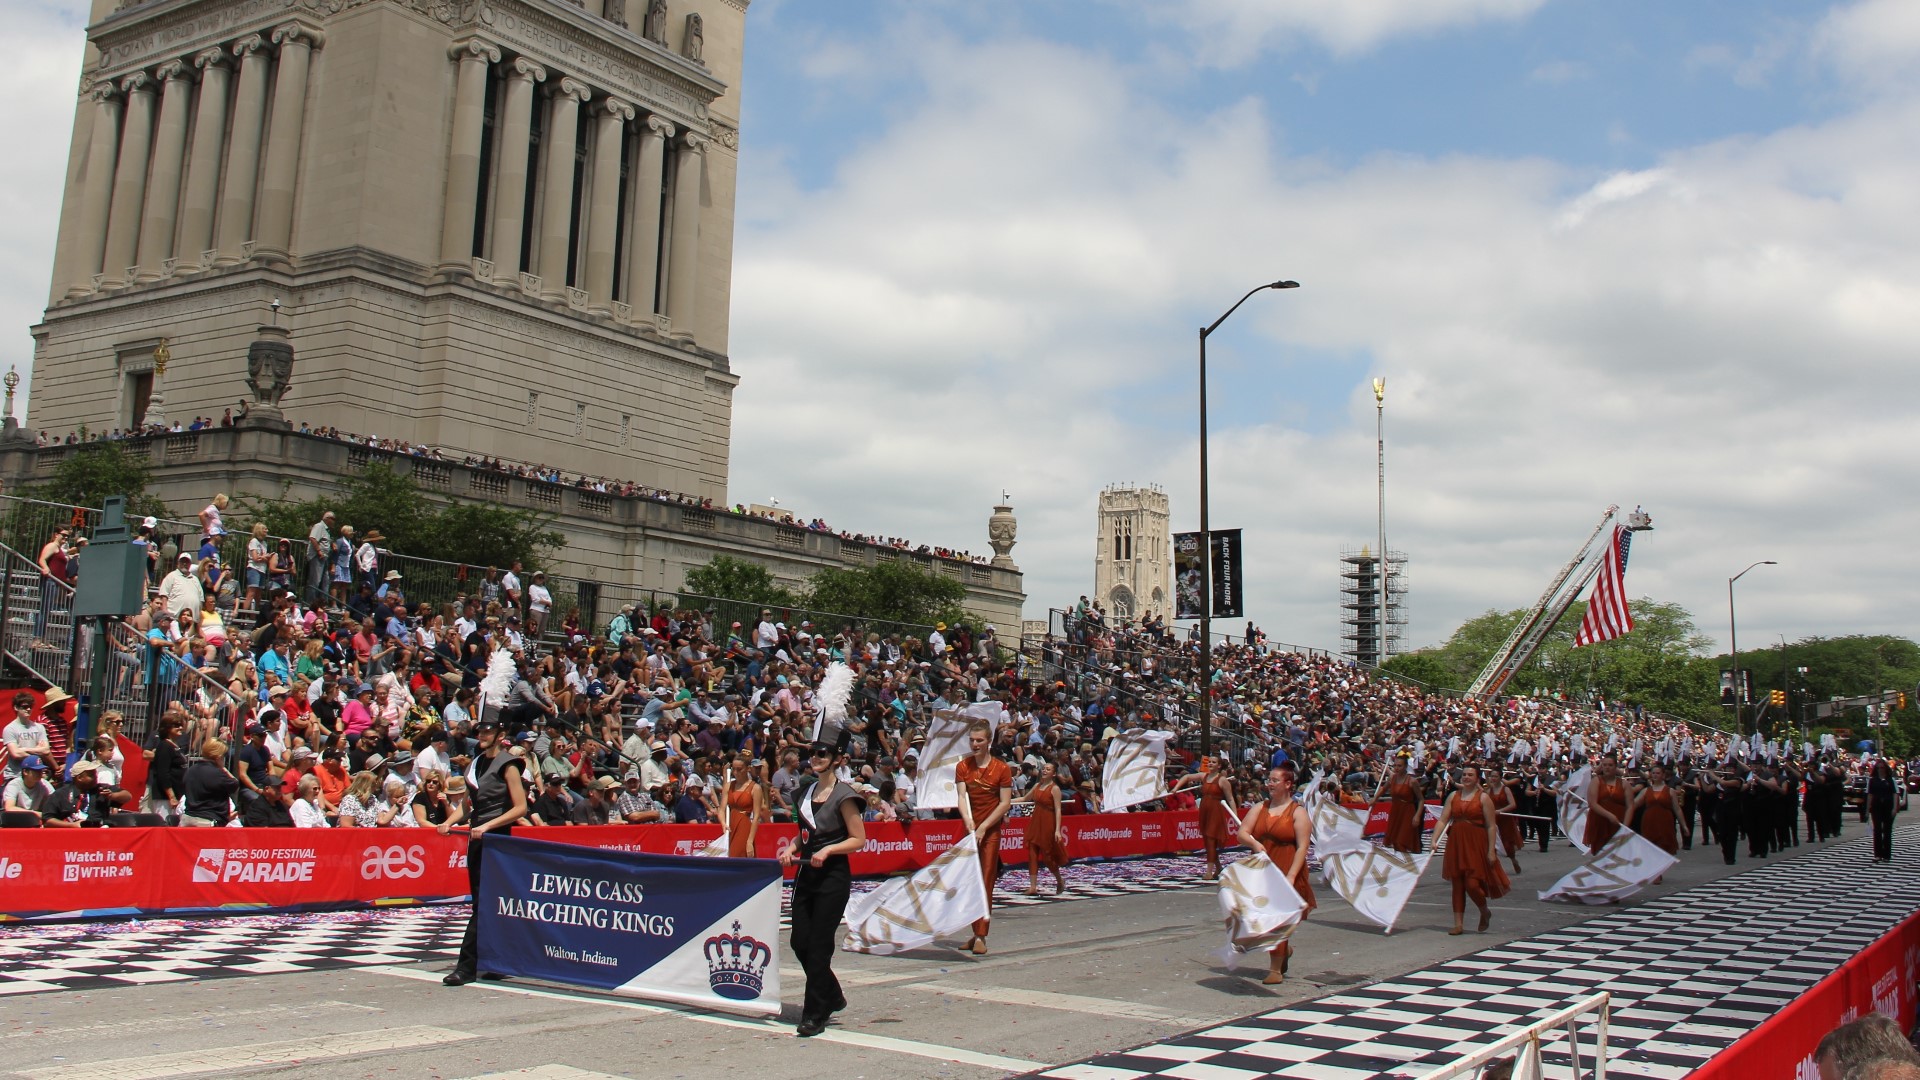 The AES 500 Festival Parade hosts 200,000 people who will line the streets of downtown Indianapolis to celebrate the return of the Indy 500.